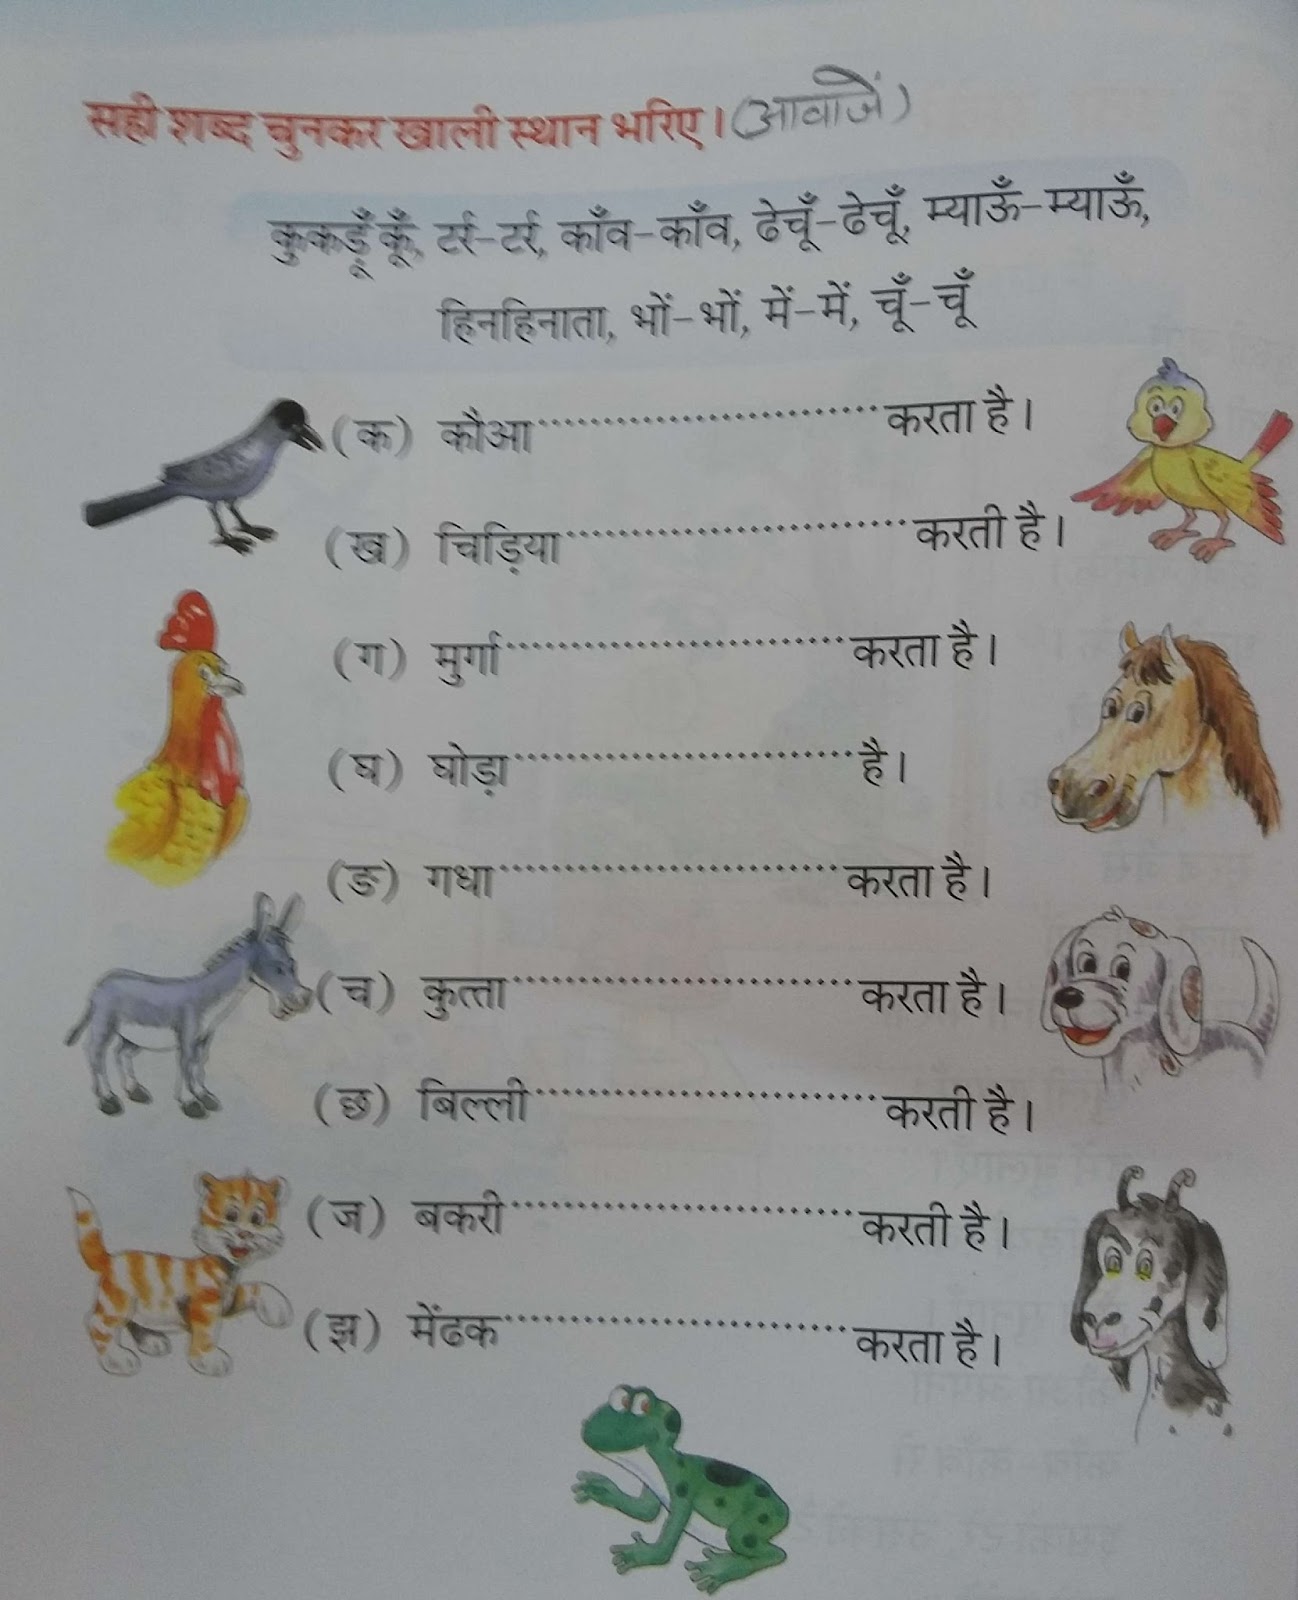 Hindi Grammar Work Sheet Collection for Classes 5,6, 7 & 8: Sounds of  animals and birds Work Sheet with SOLUTIONS/ANSWERS